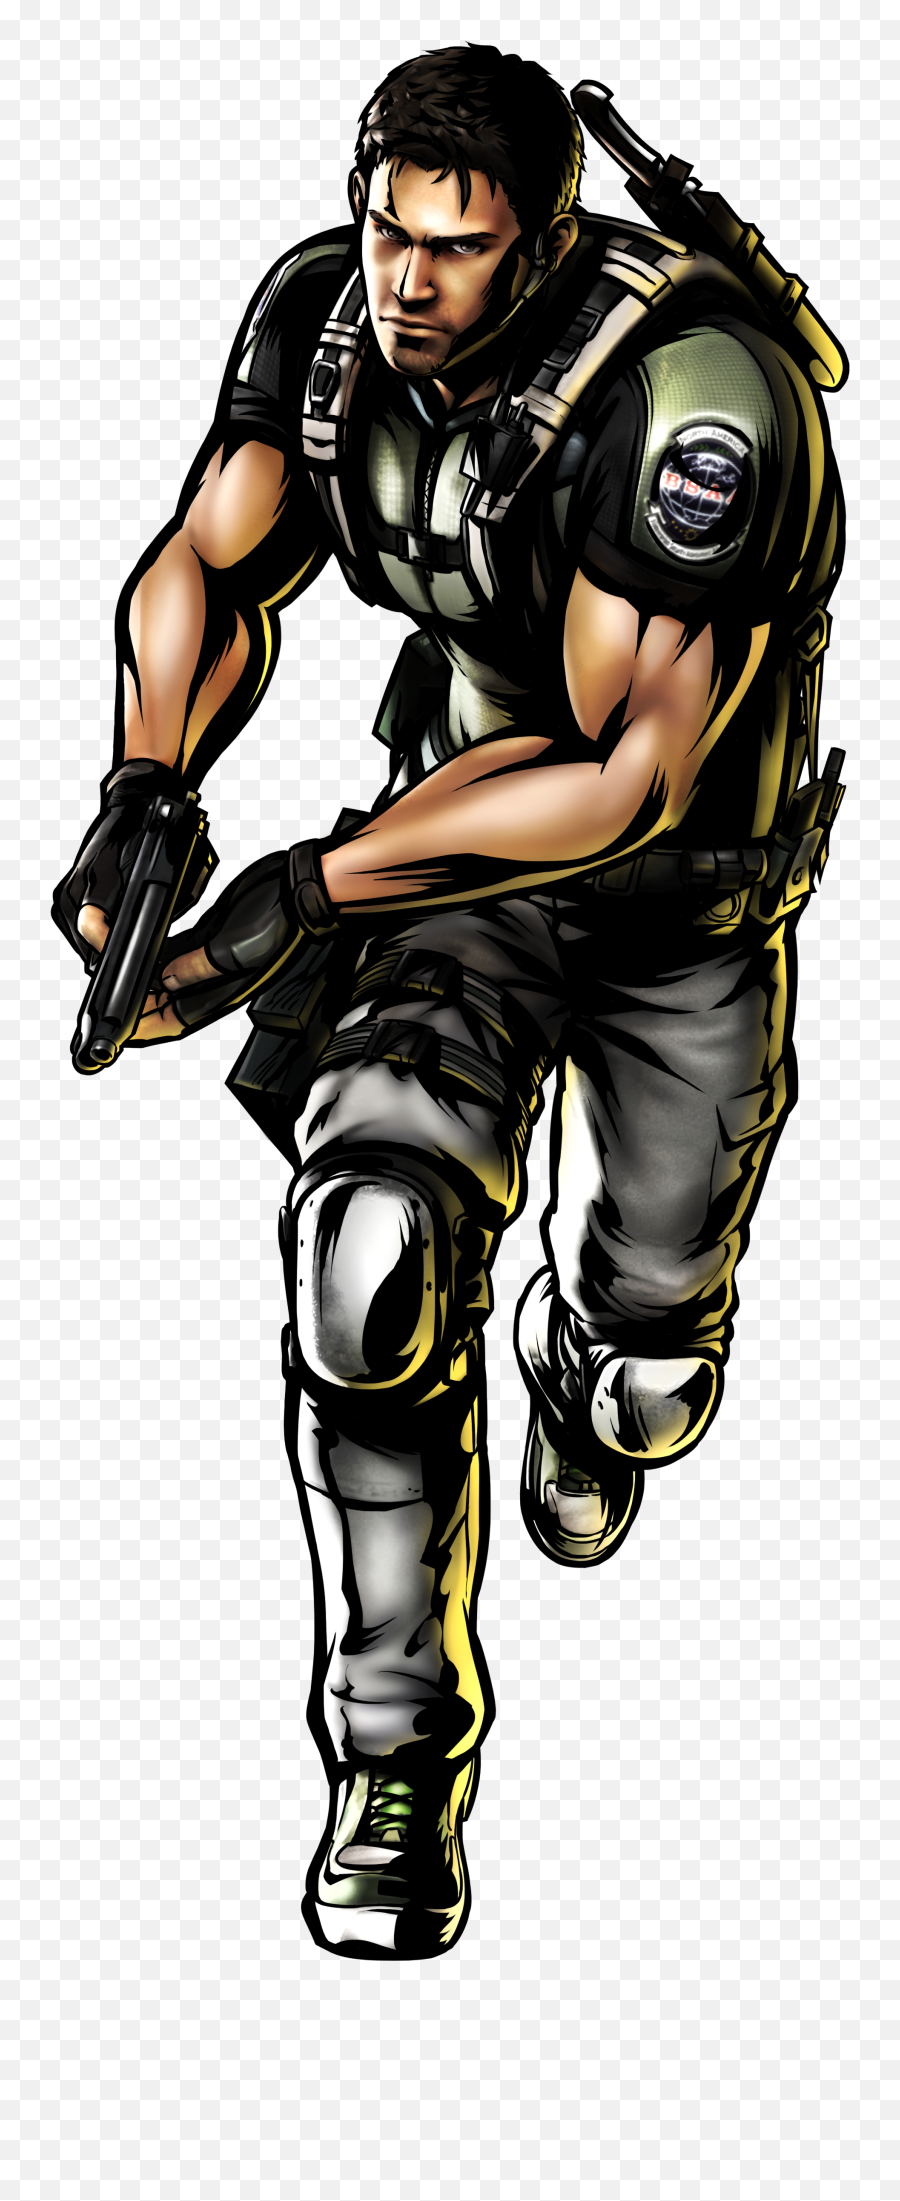 Chris Redfield Evil And 4 - Chris Redfield Resident Evil 5 Art Png,Chris Redfield Png